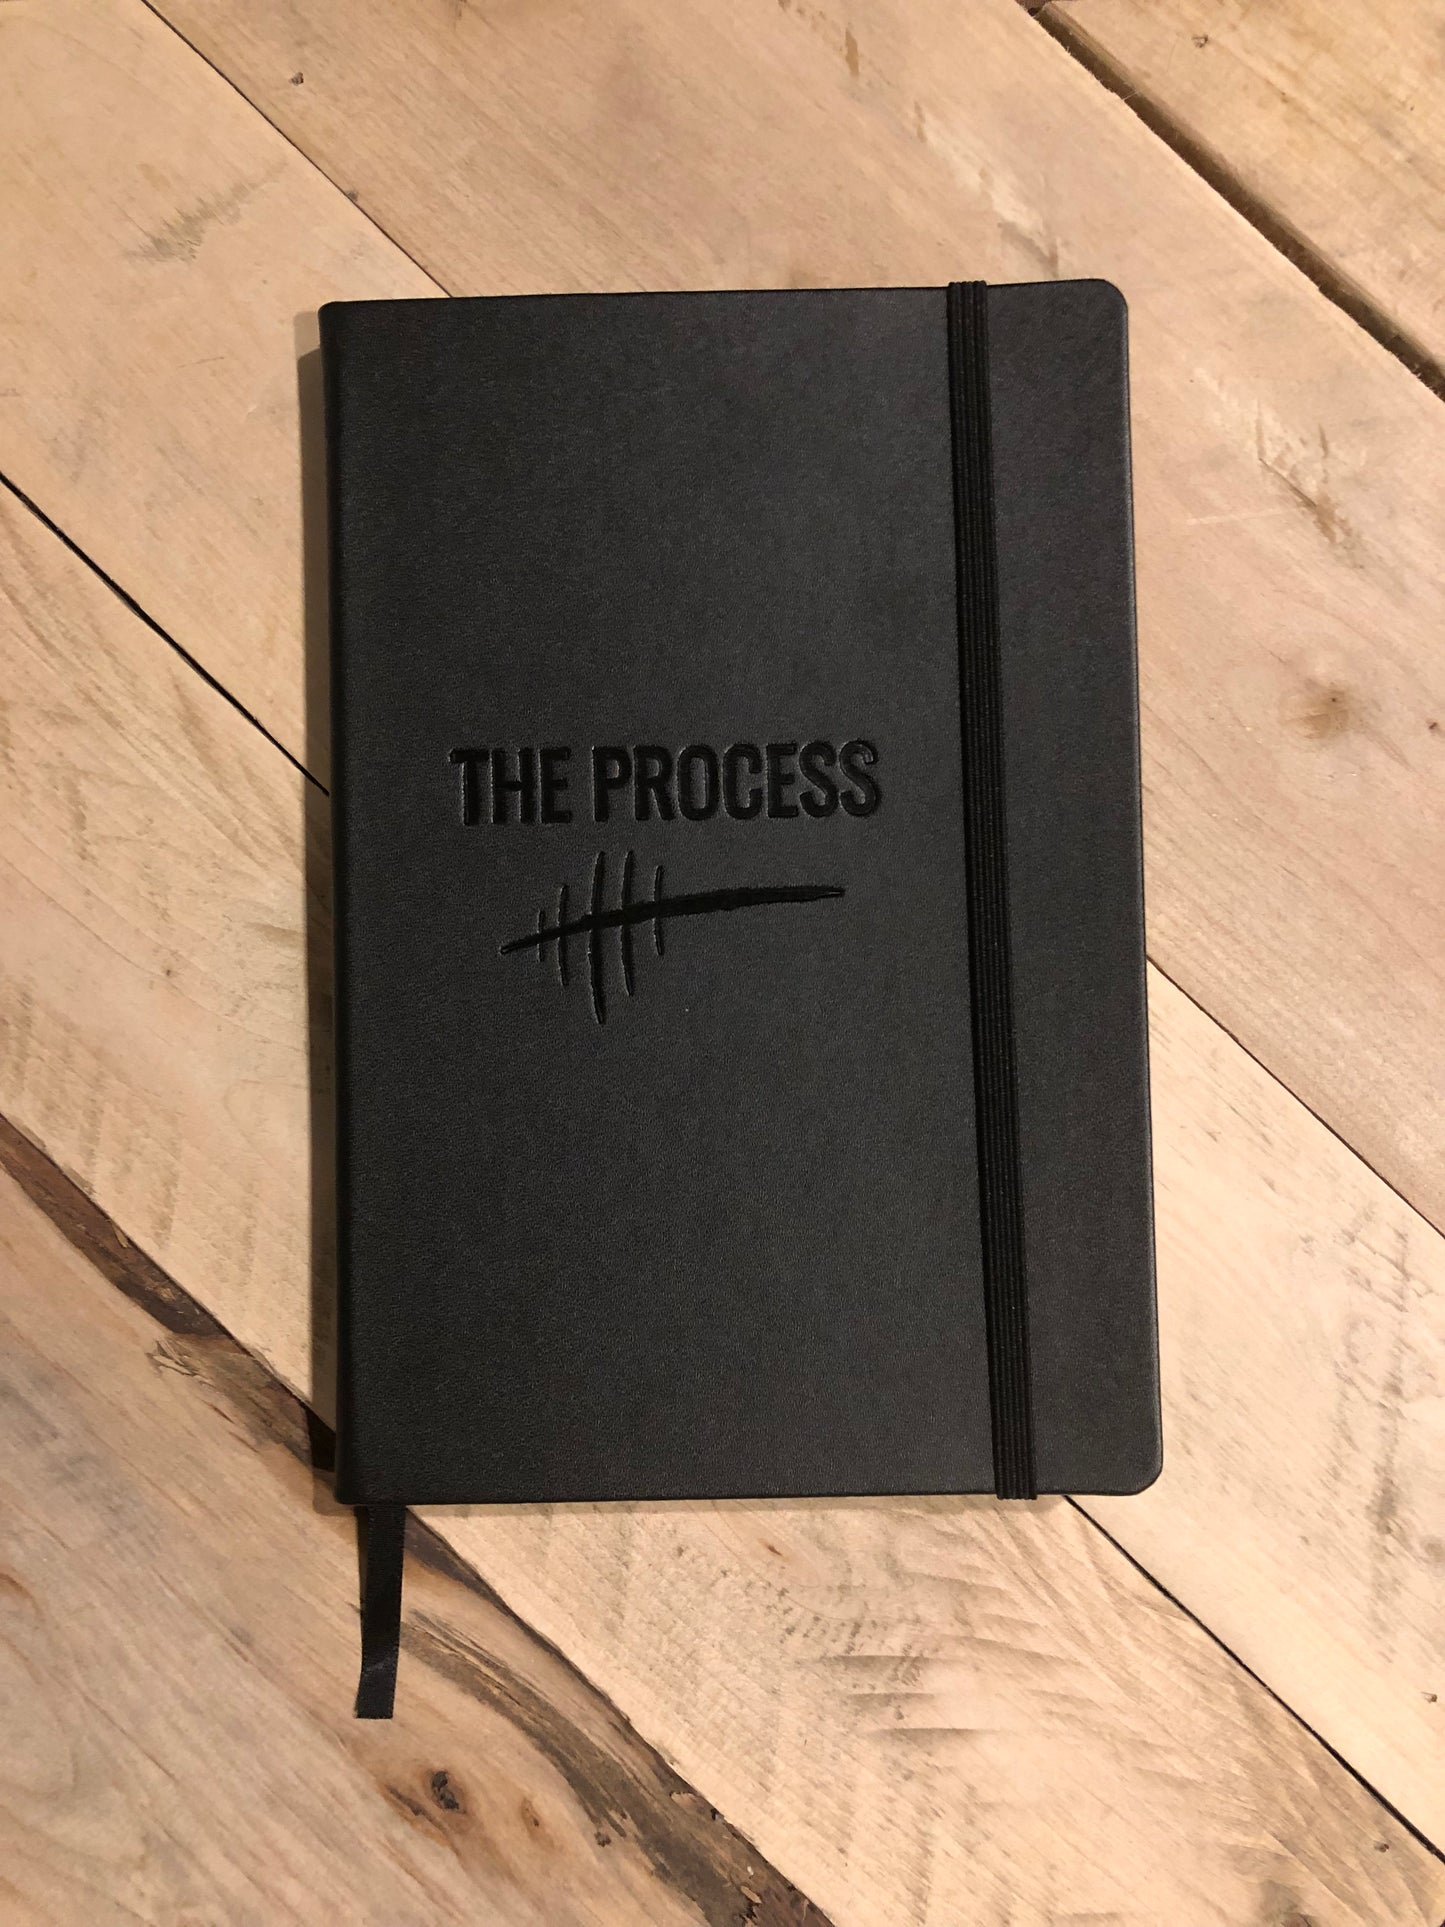 The Journey Journal